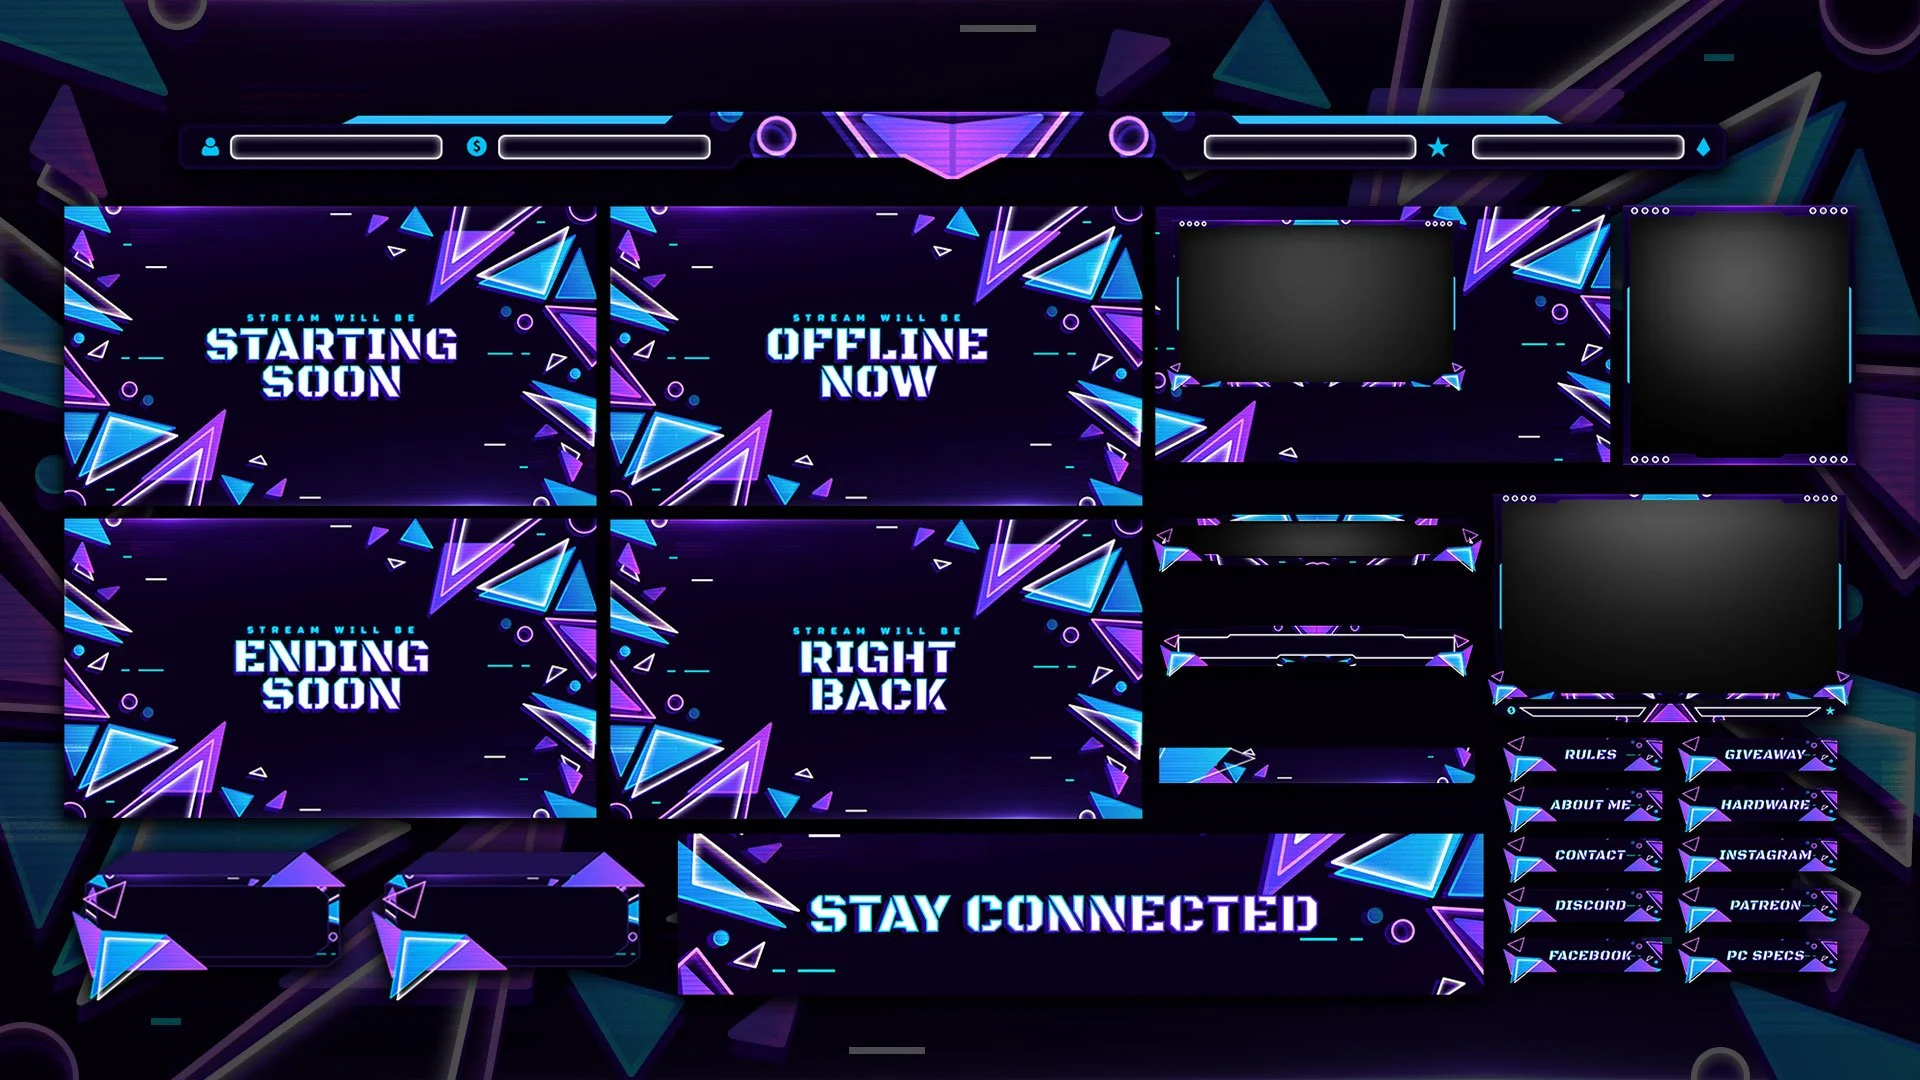 Stream Overlay - NocturnTheWolf Just Chatting 2 by